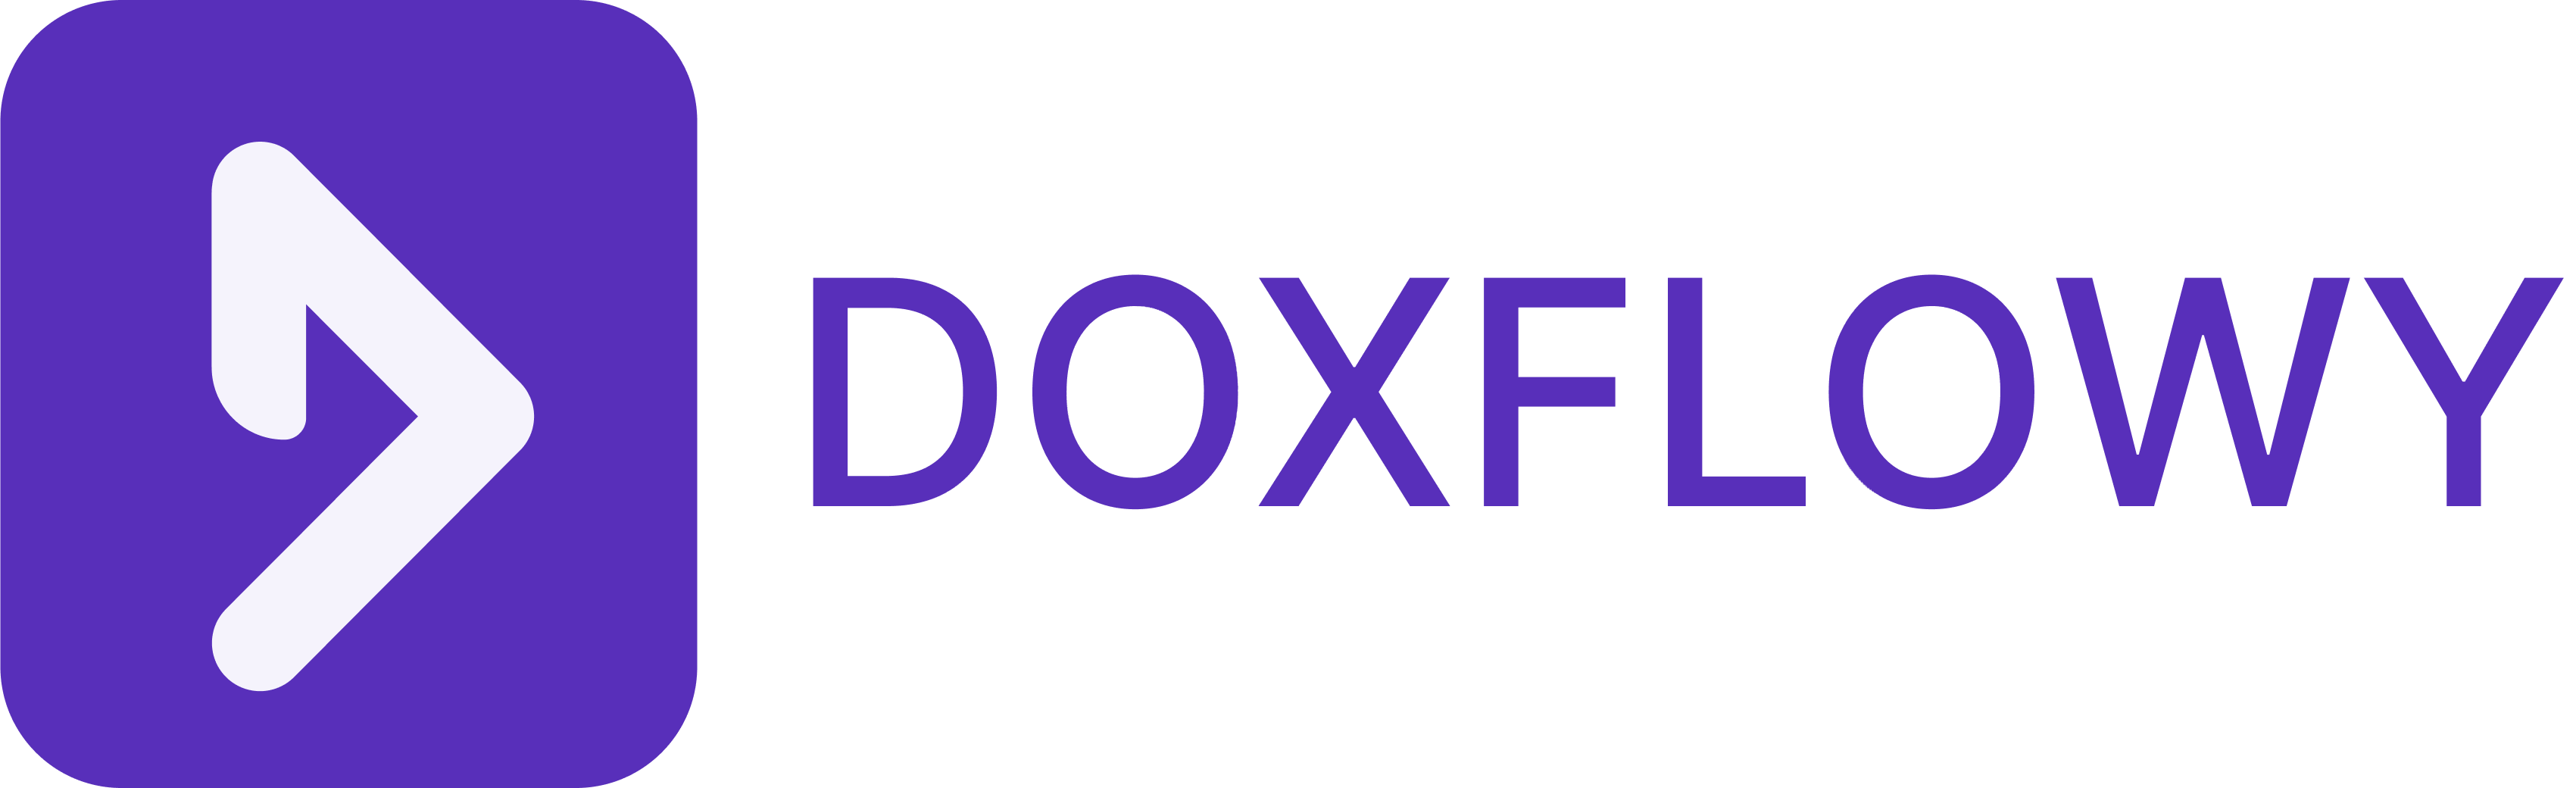 Logo primary color with purple text and transparent background.